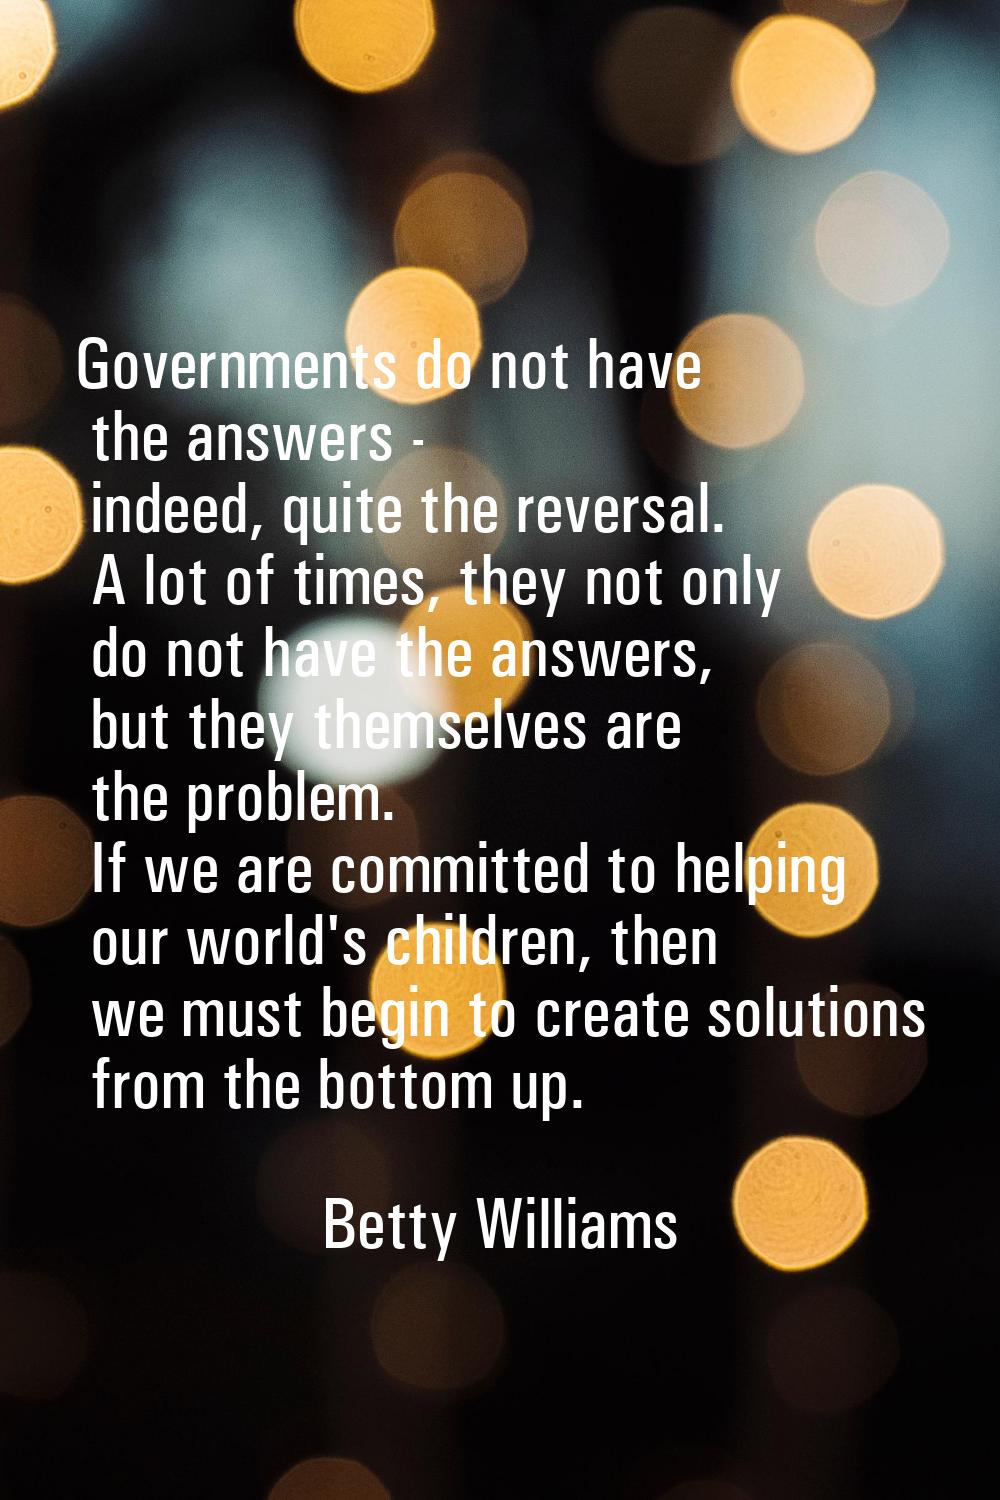 Governments do not have the answers - indeed, quite the reversal. A lot of times, they not only do 